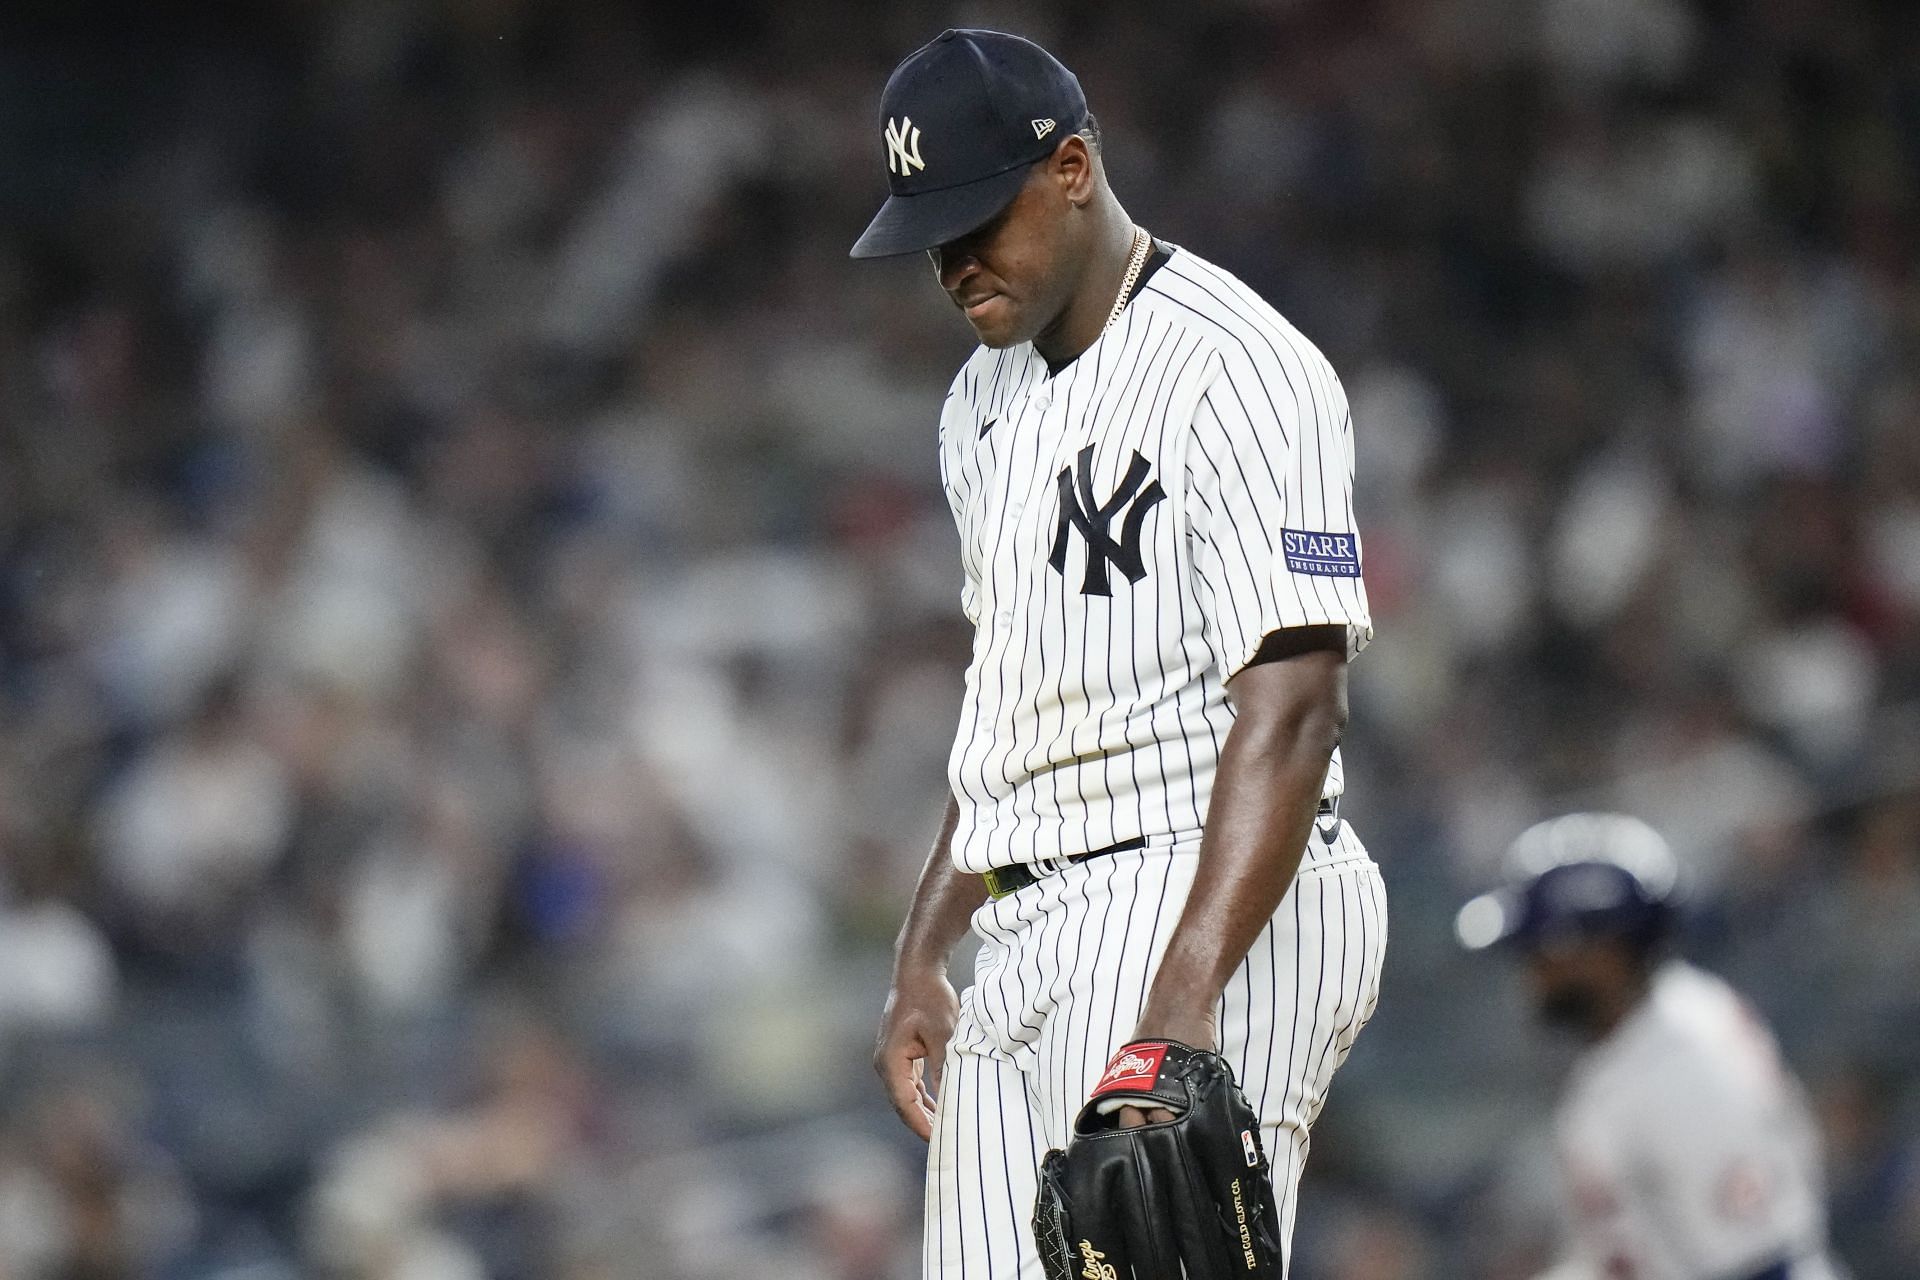 If finally healthy, Luis Severino gives Yankees rotation major boost -  Pinstripe Alley